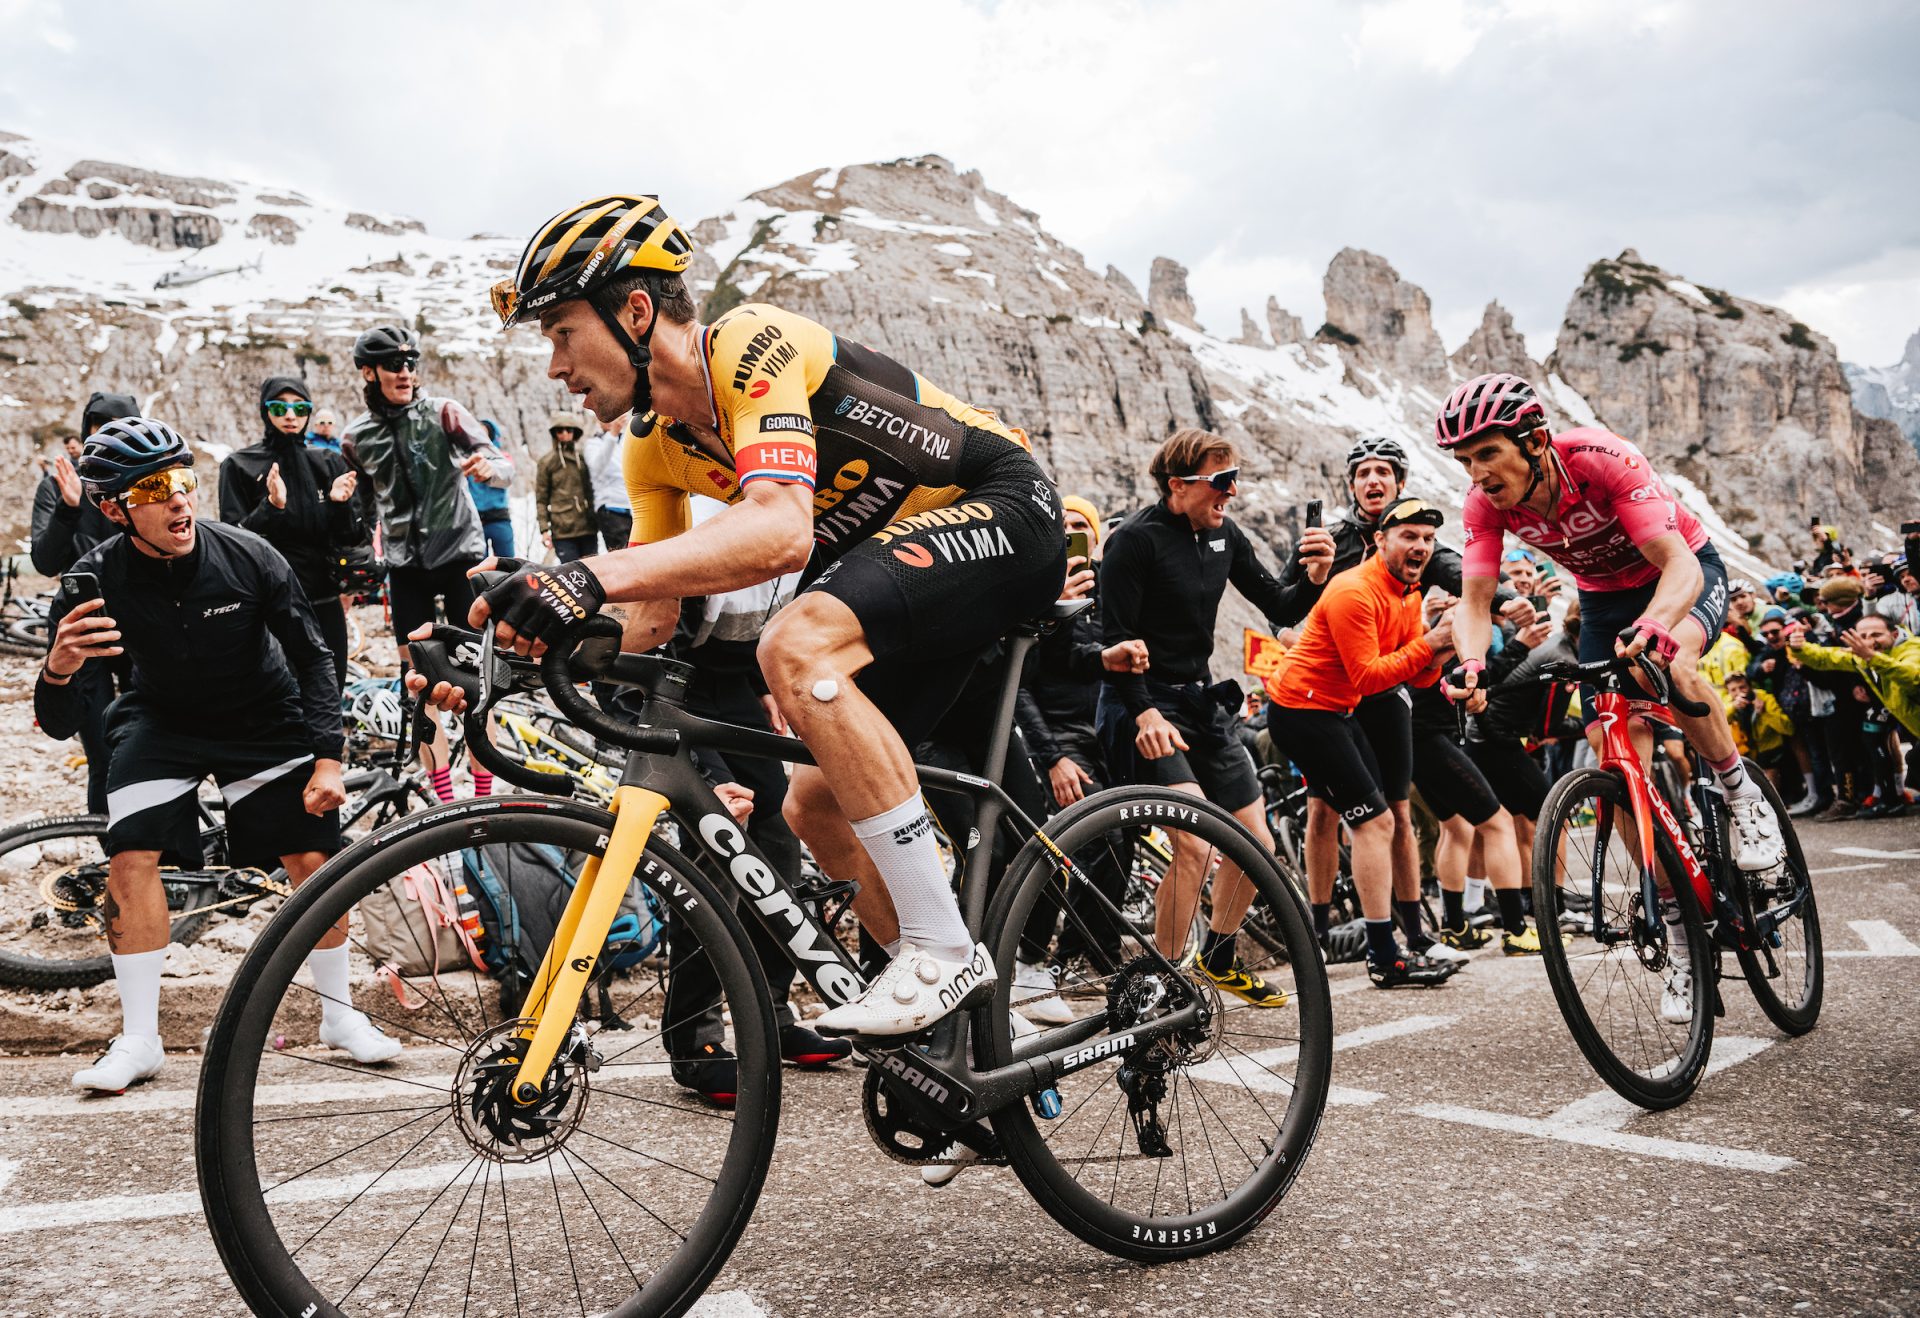 Primoz Roglic leads Geraint Thomas, who is in the pink jersey, up a large climb with snow capped peaks in the background at the 2023 Giro d'Italia.